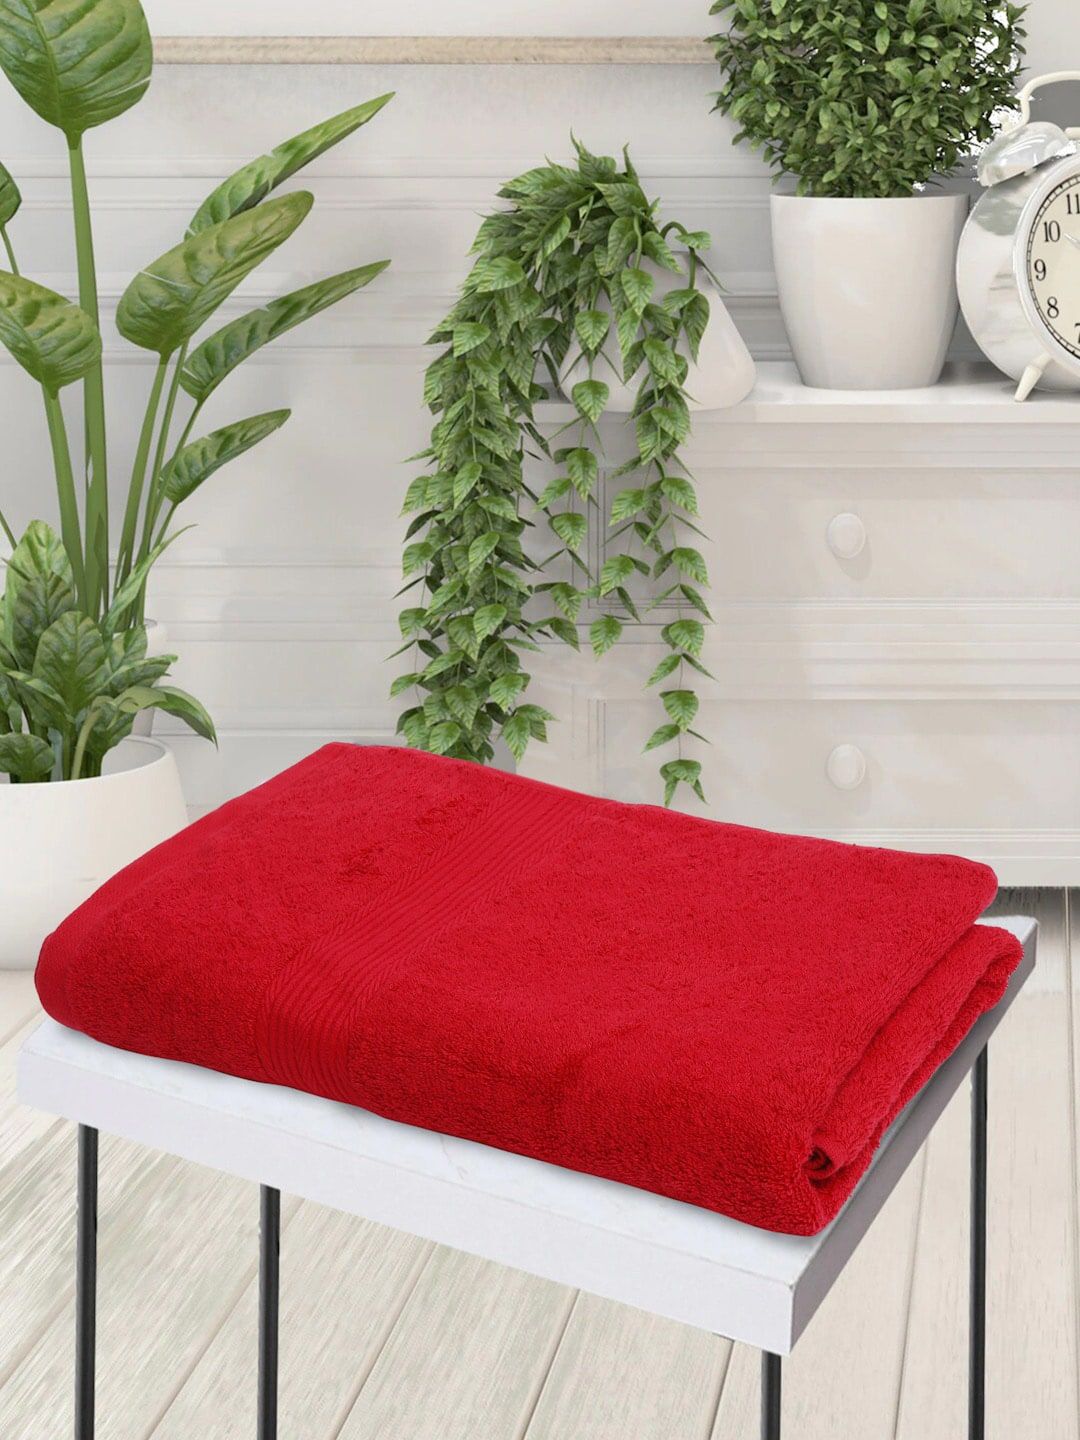 Creeva Red Solid 500 GSM Cotton Bath Towel Price in India